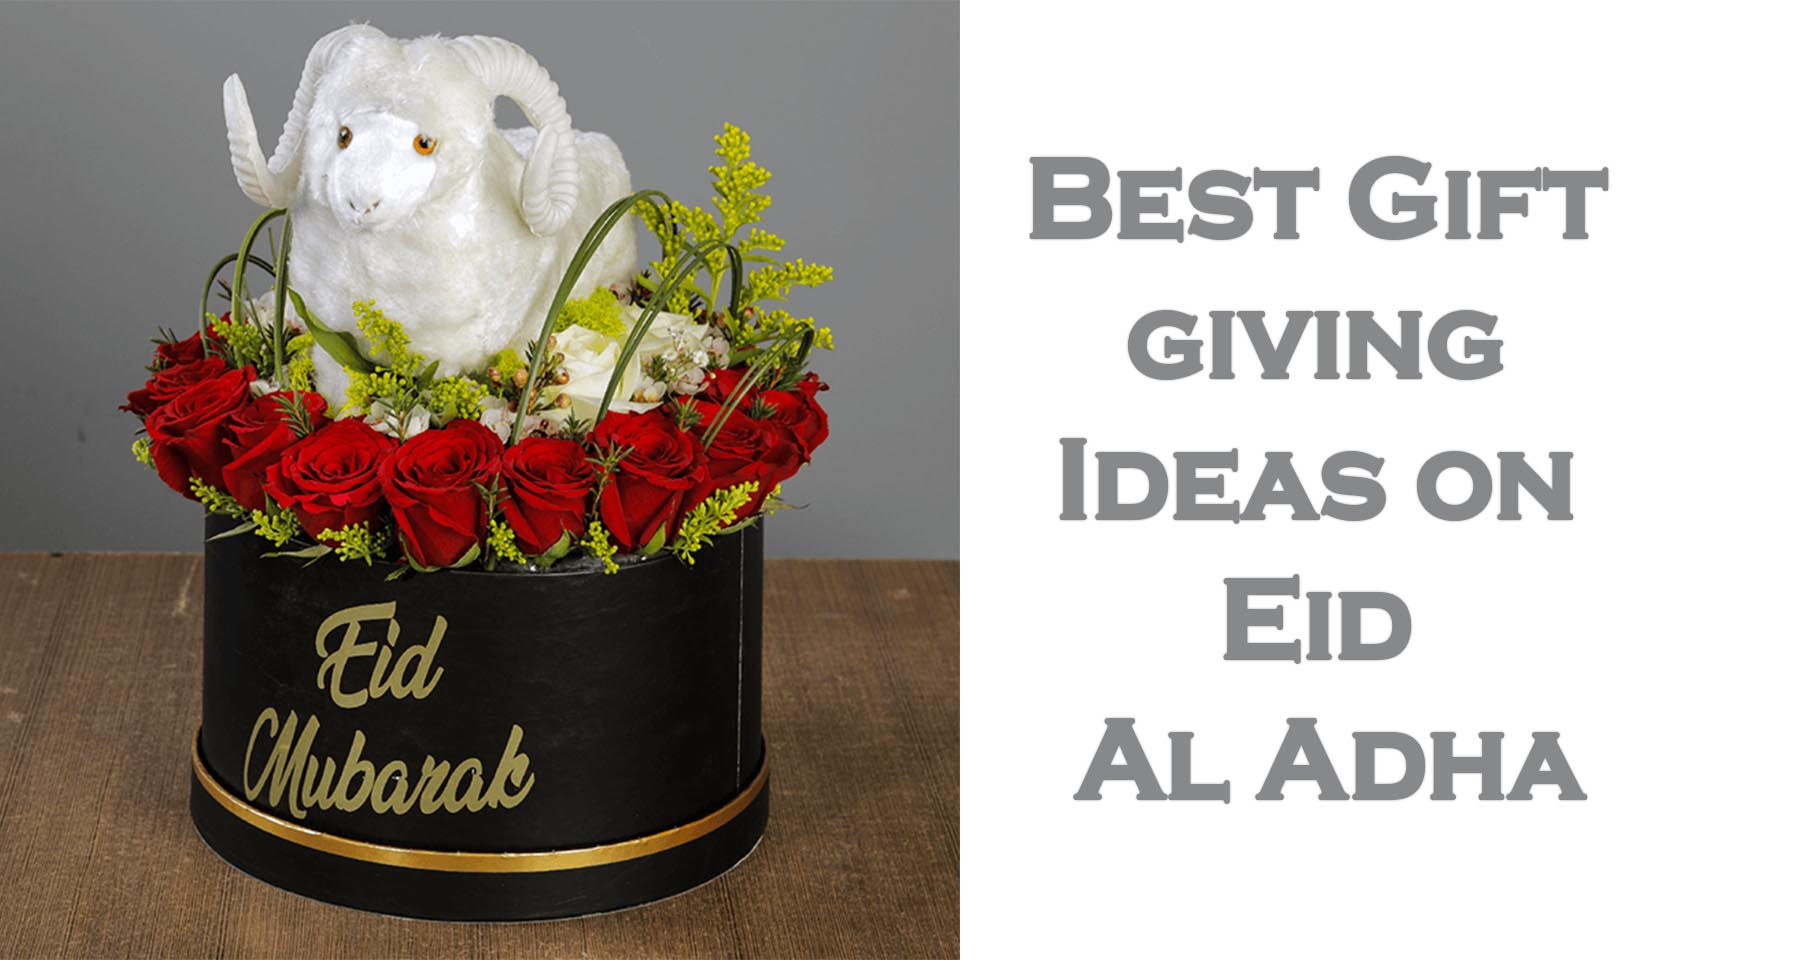 A Guide to Eid al-Fitr Gifts | The Royal Mint